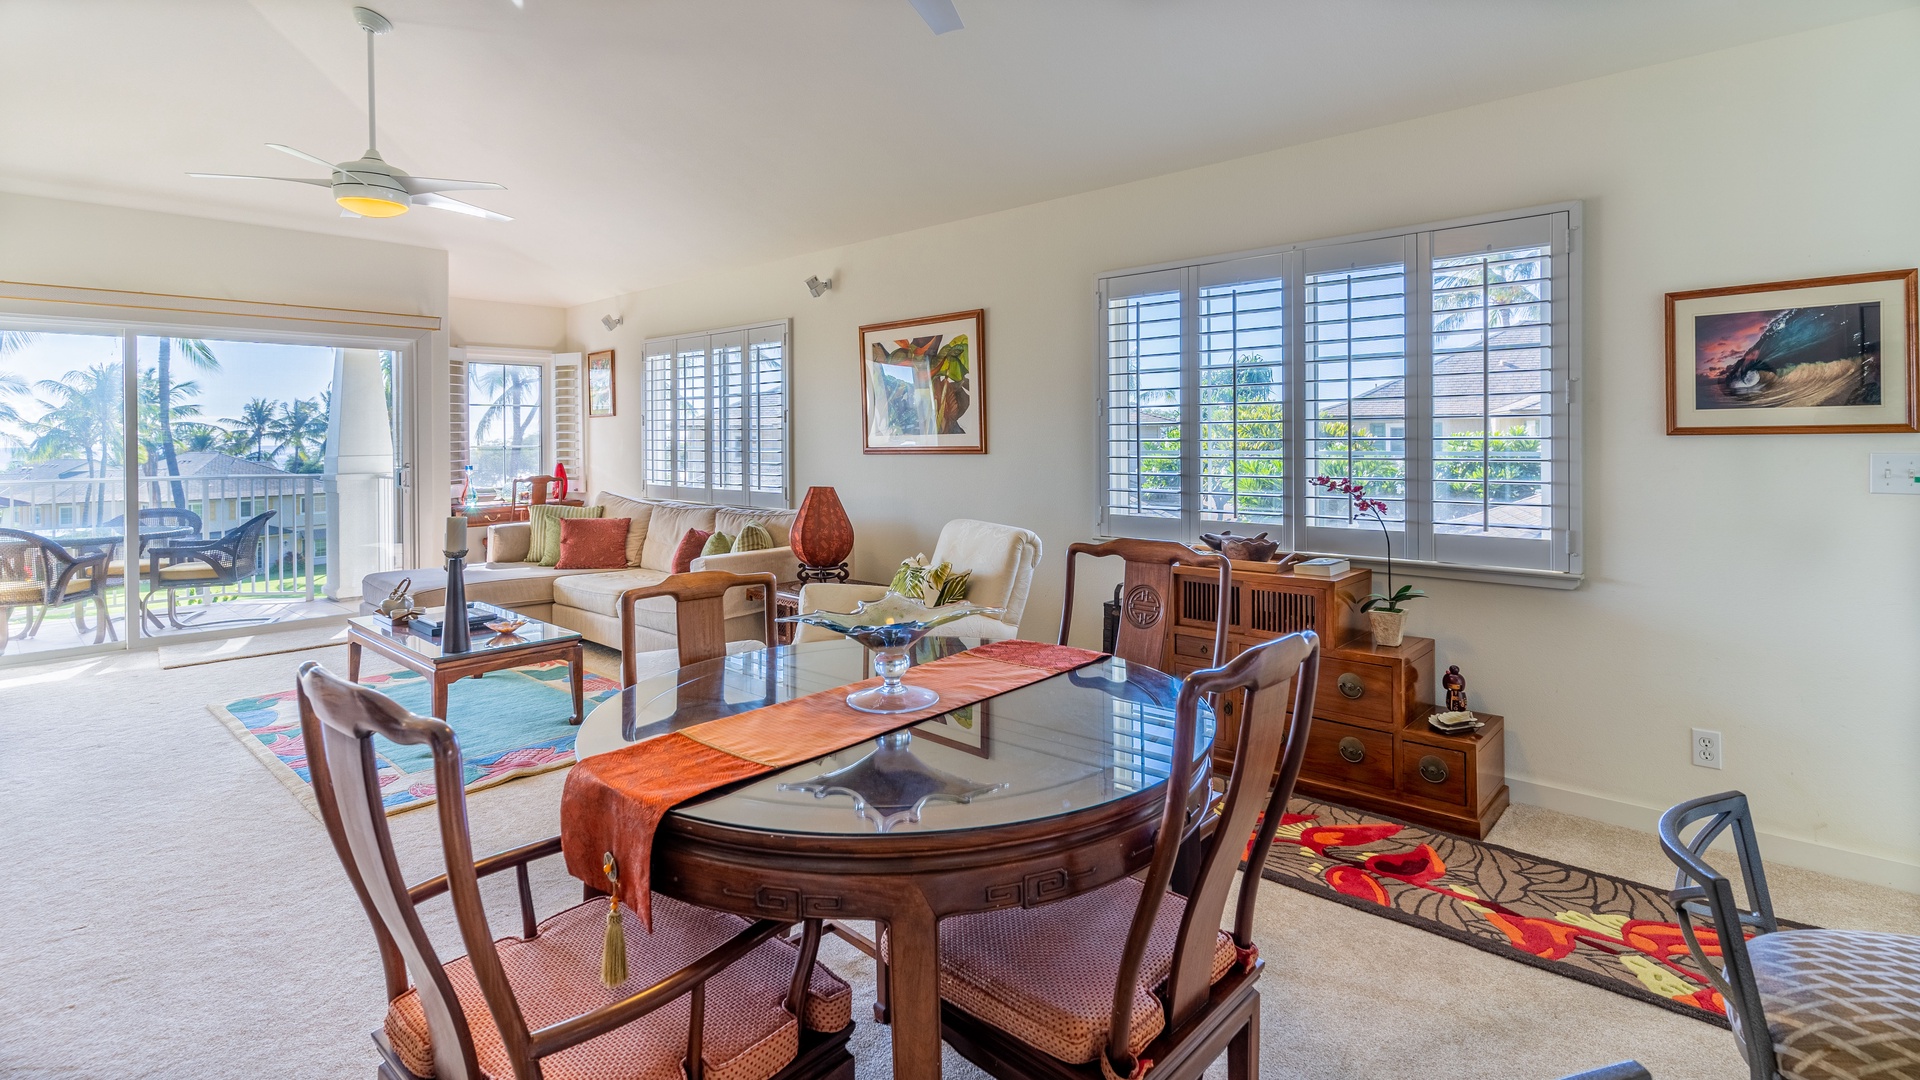 Kapolei Vacation Rentals, Kai Lani 16C - Expansive space includes the kitchen, living and dining areas.